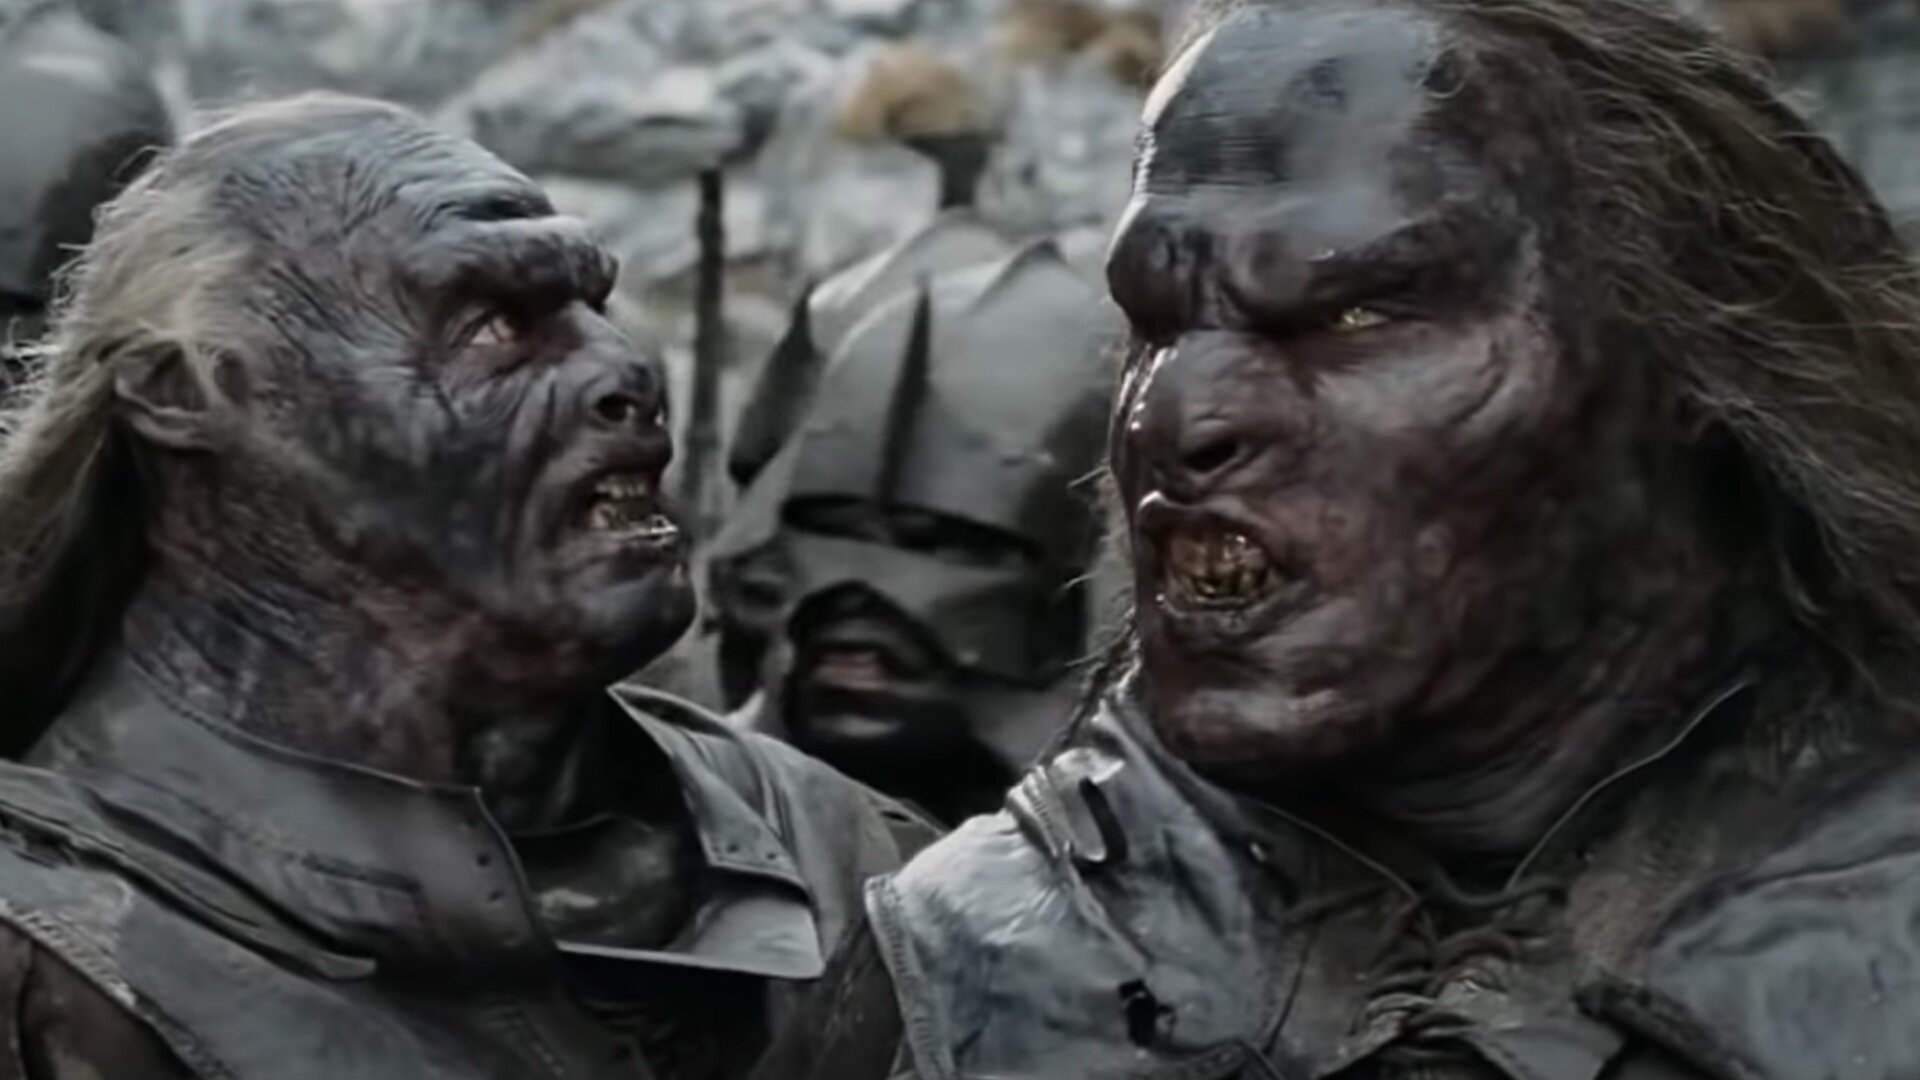 The Uruk Hai From THE LORD OF THE RINGS Reimagined With Normal Voices